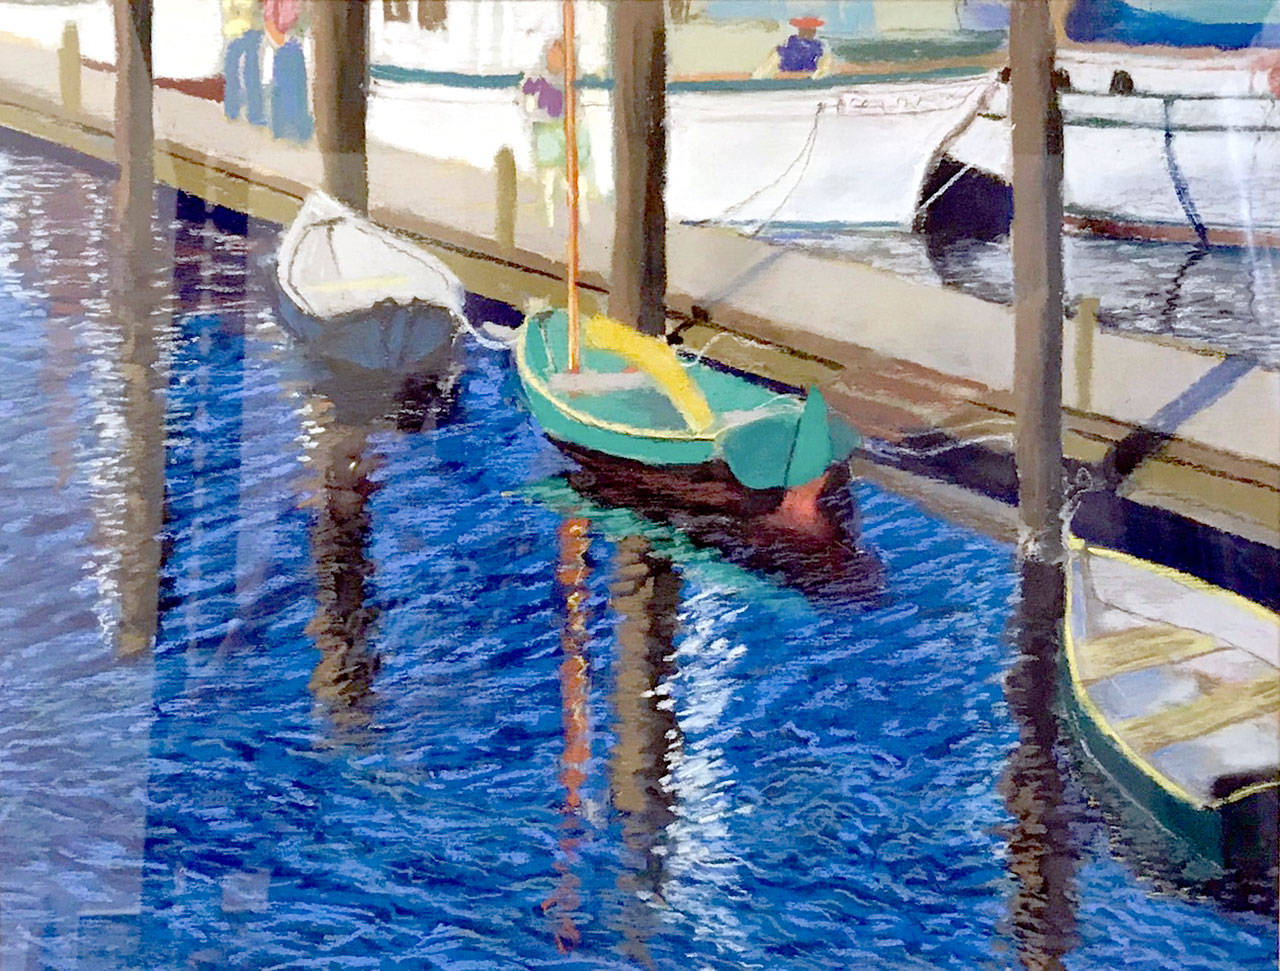 “Boats at the Pier” by Carol Heath Stabile from the Private Collection of Elaine and Rene Levy.